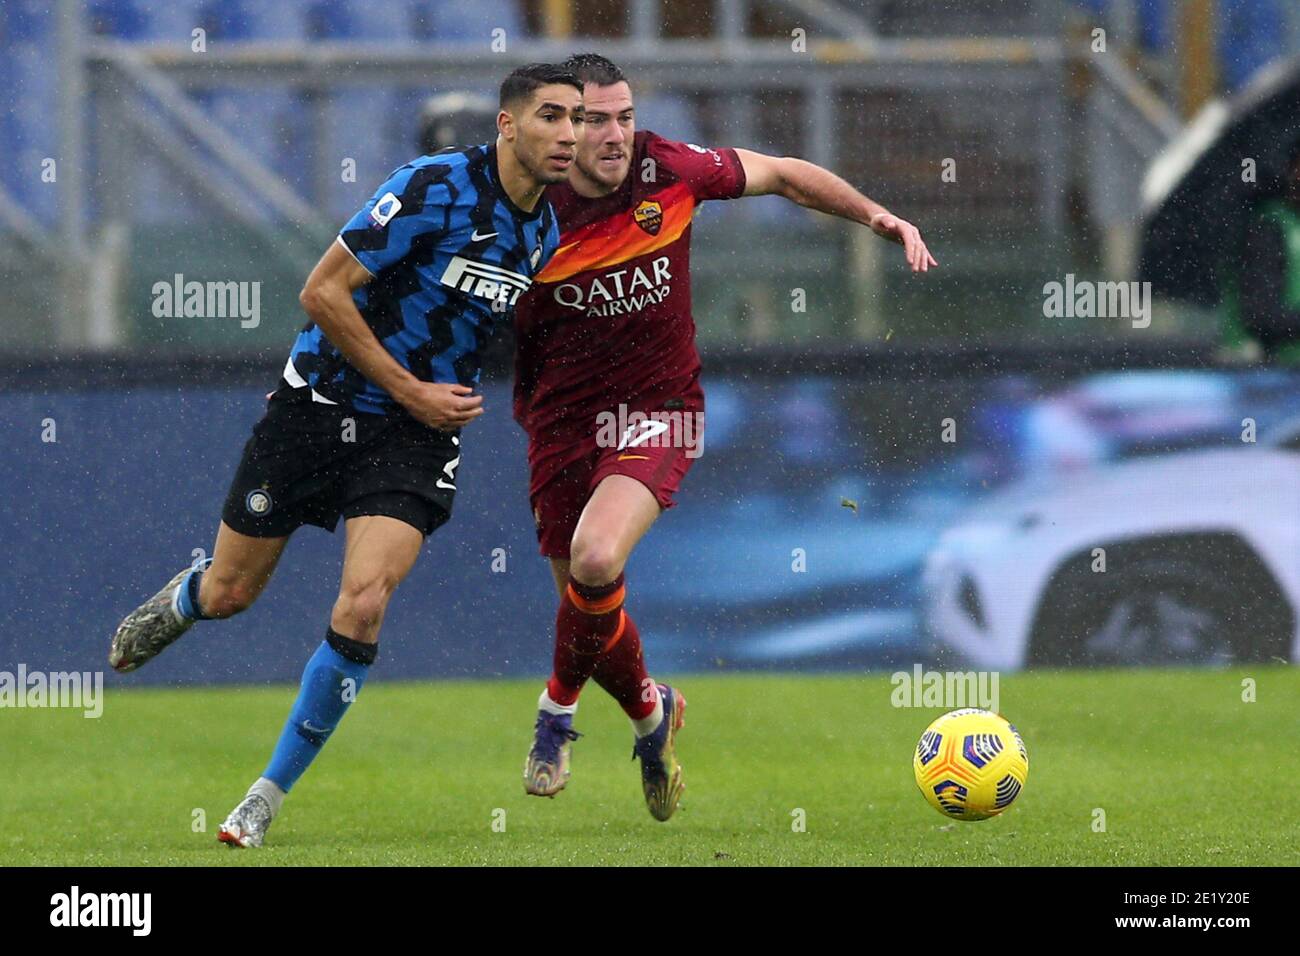 Rome, Italy. 10th Jan, 2021. ROME, Italy - 10.01.2021: A.Hakimi (Inter),  JORDAN VERETOUT (ROMA) in action during the Italian Serie A league  2020-2021 soccer match between AS ROMA vs FC INTER, at